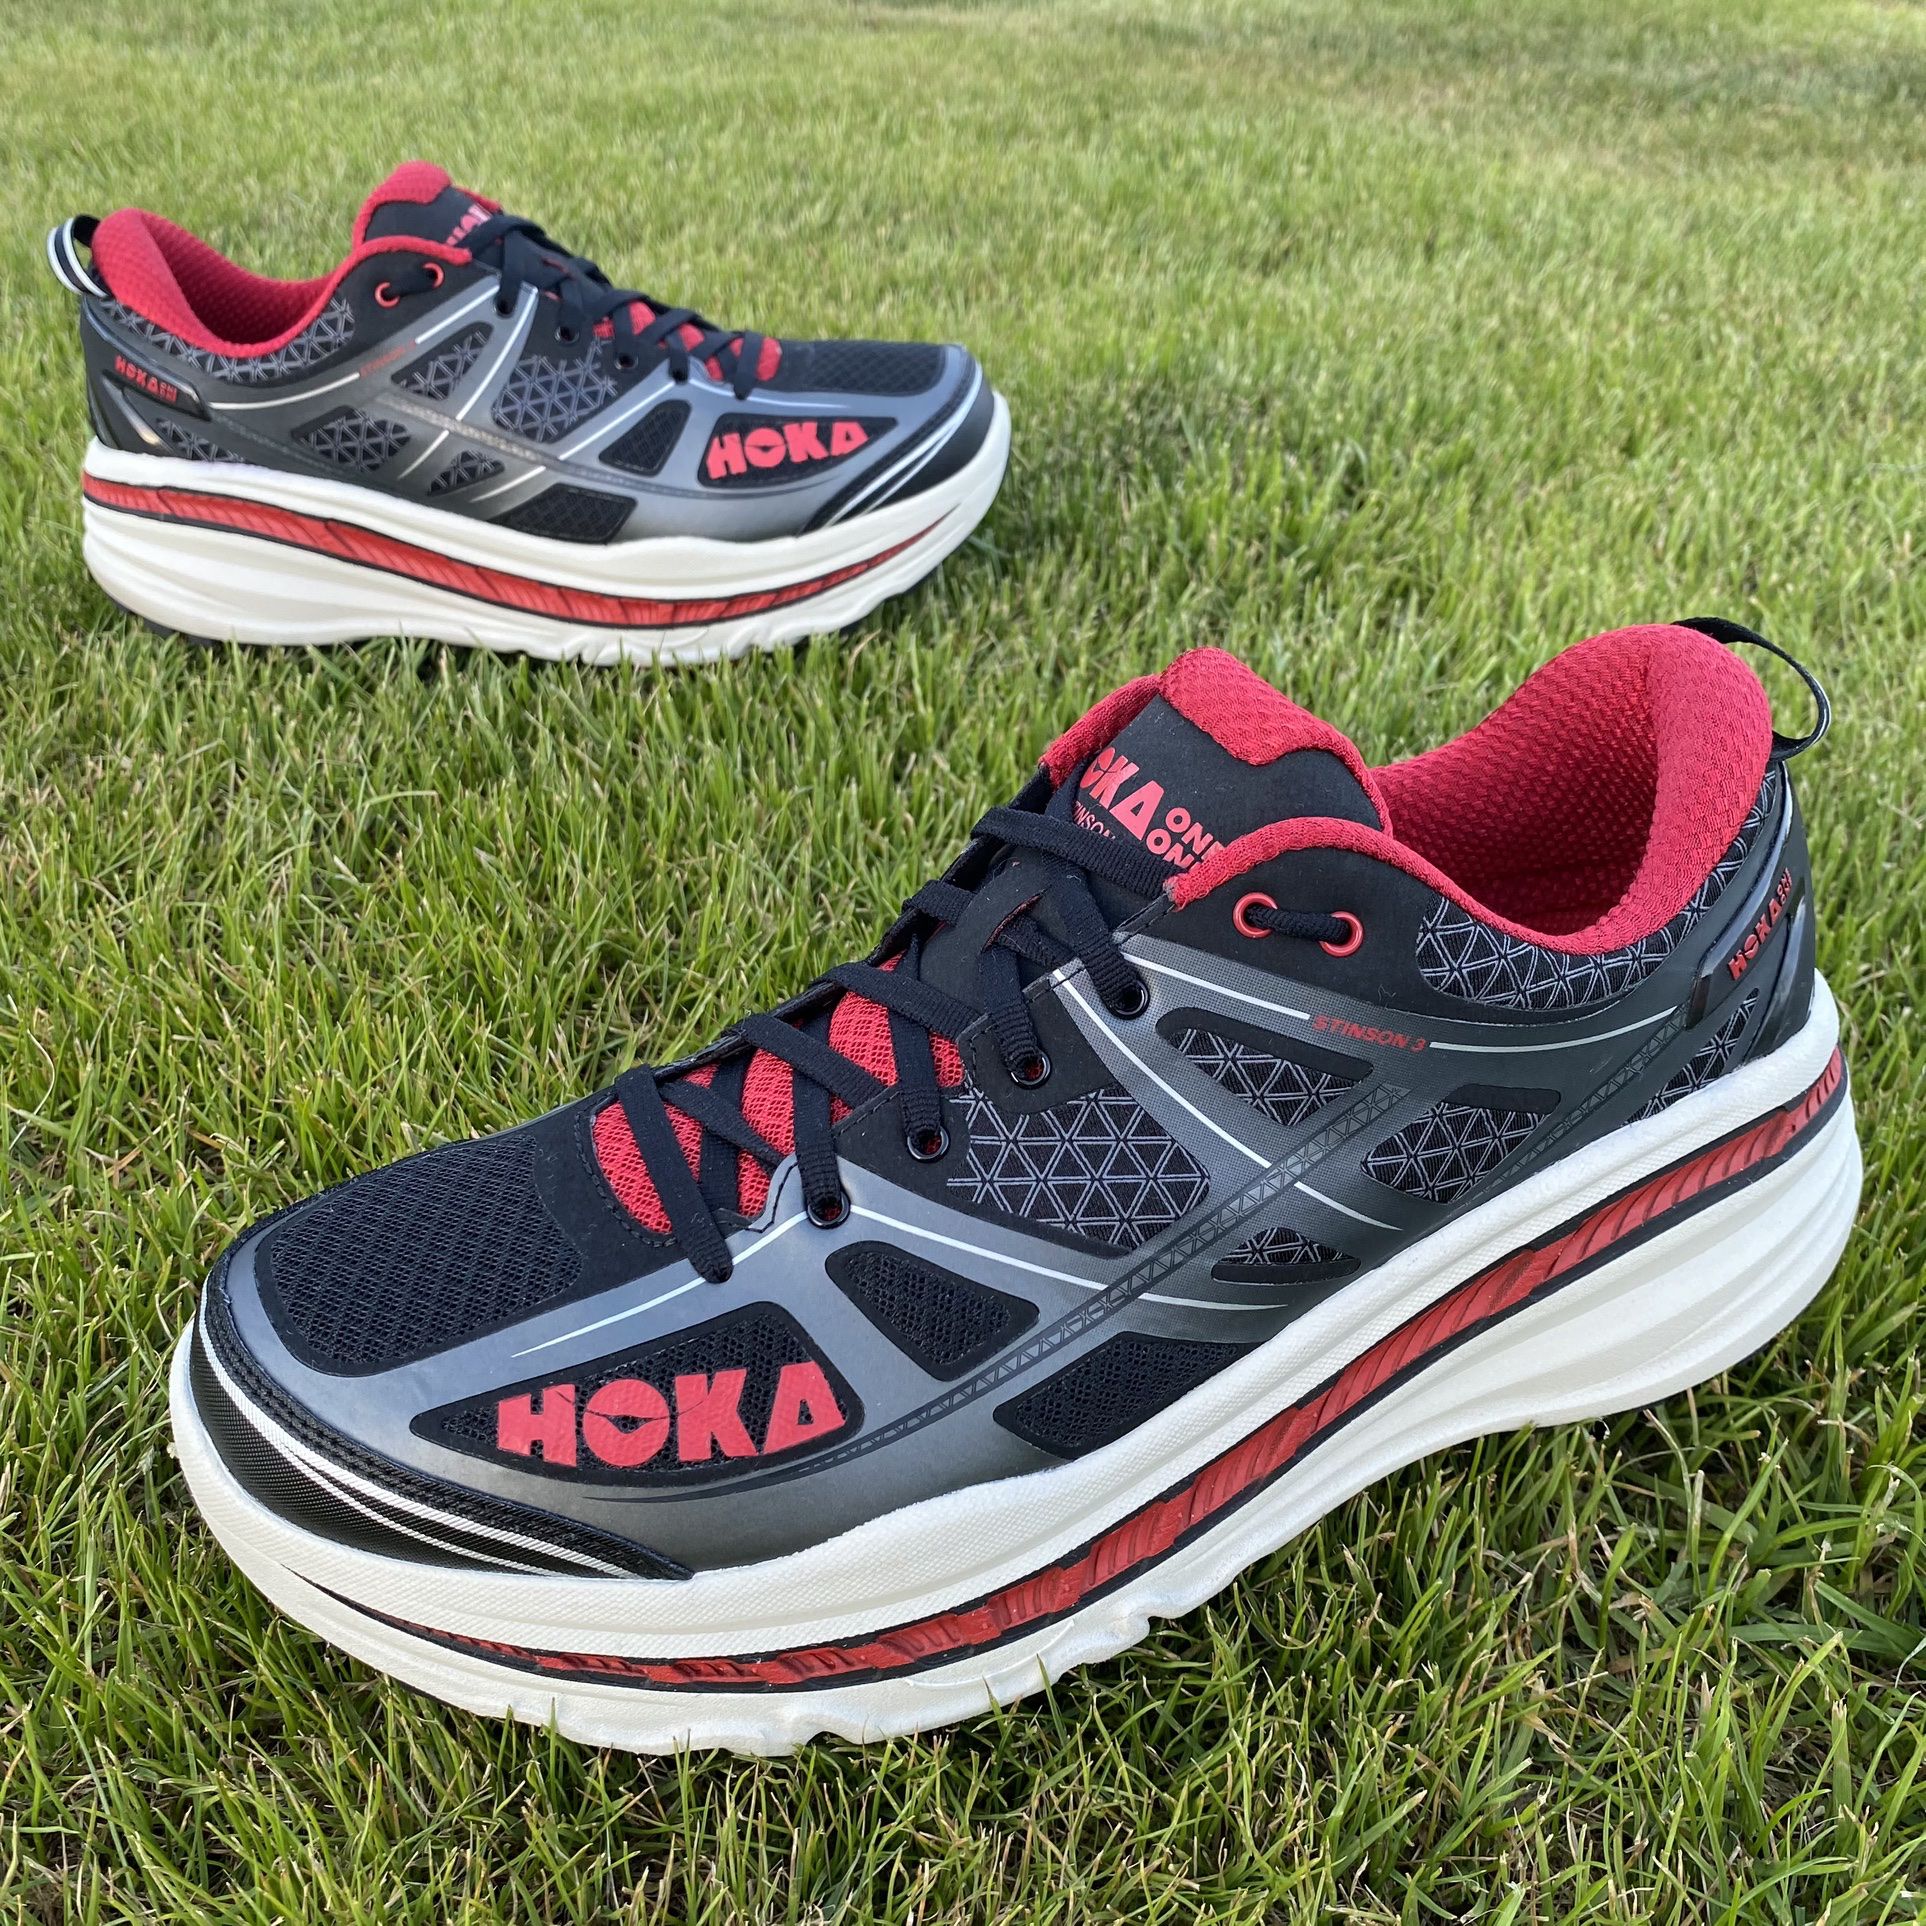 Retail $160: New Without BoxHoka One One Stinson 3 ATR Running Shoes Mens Size 12